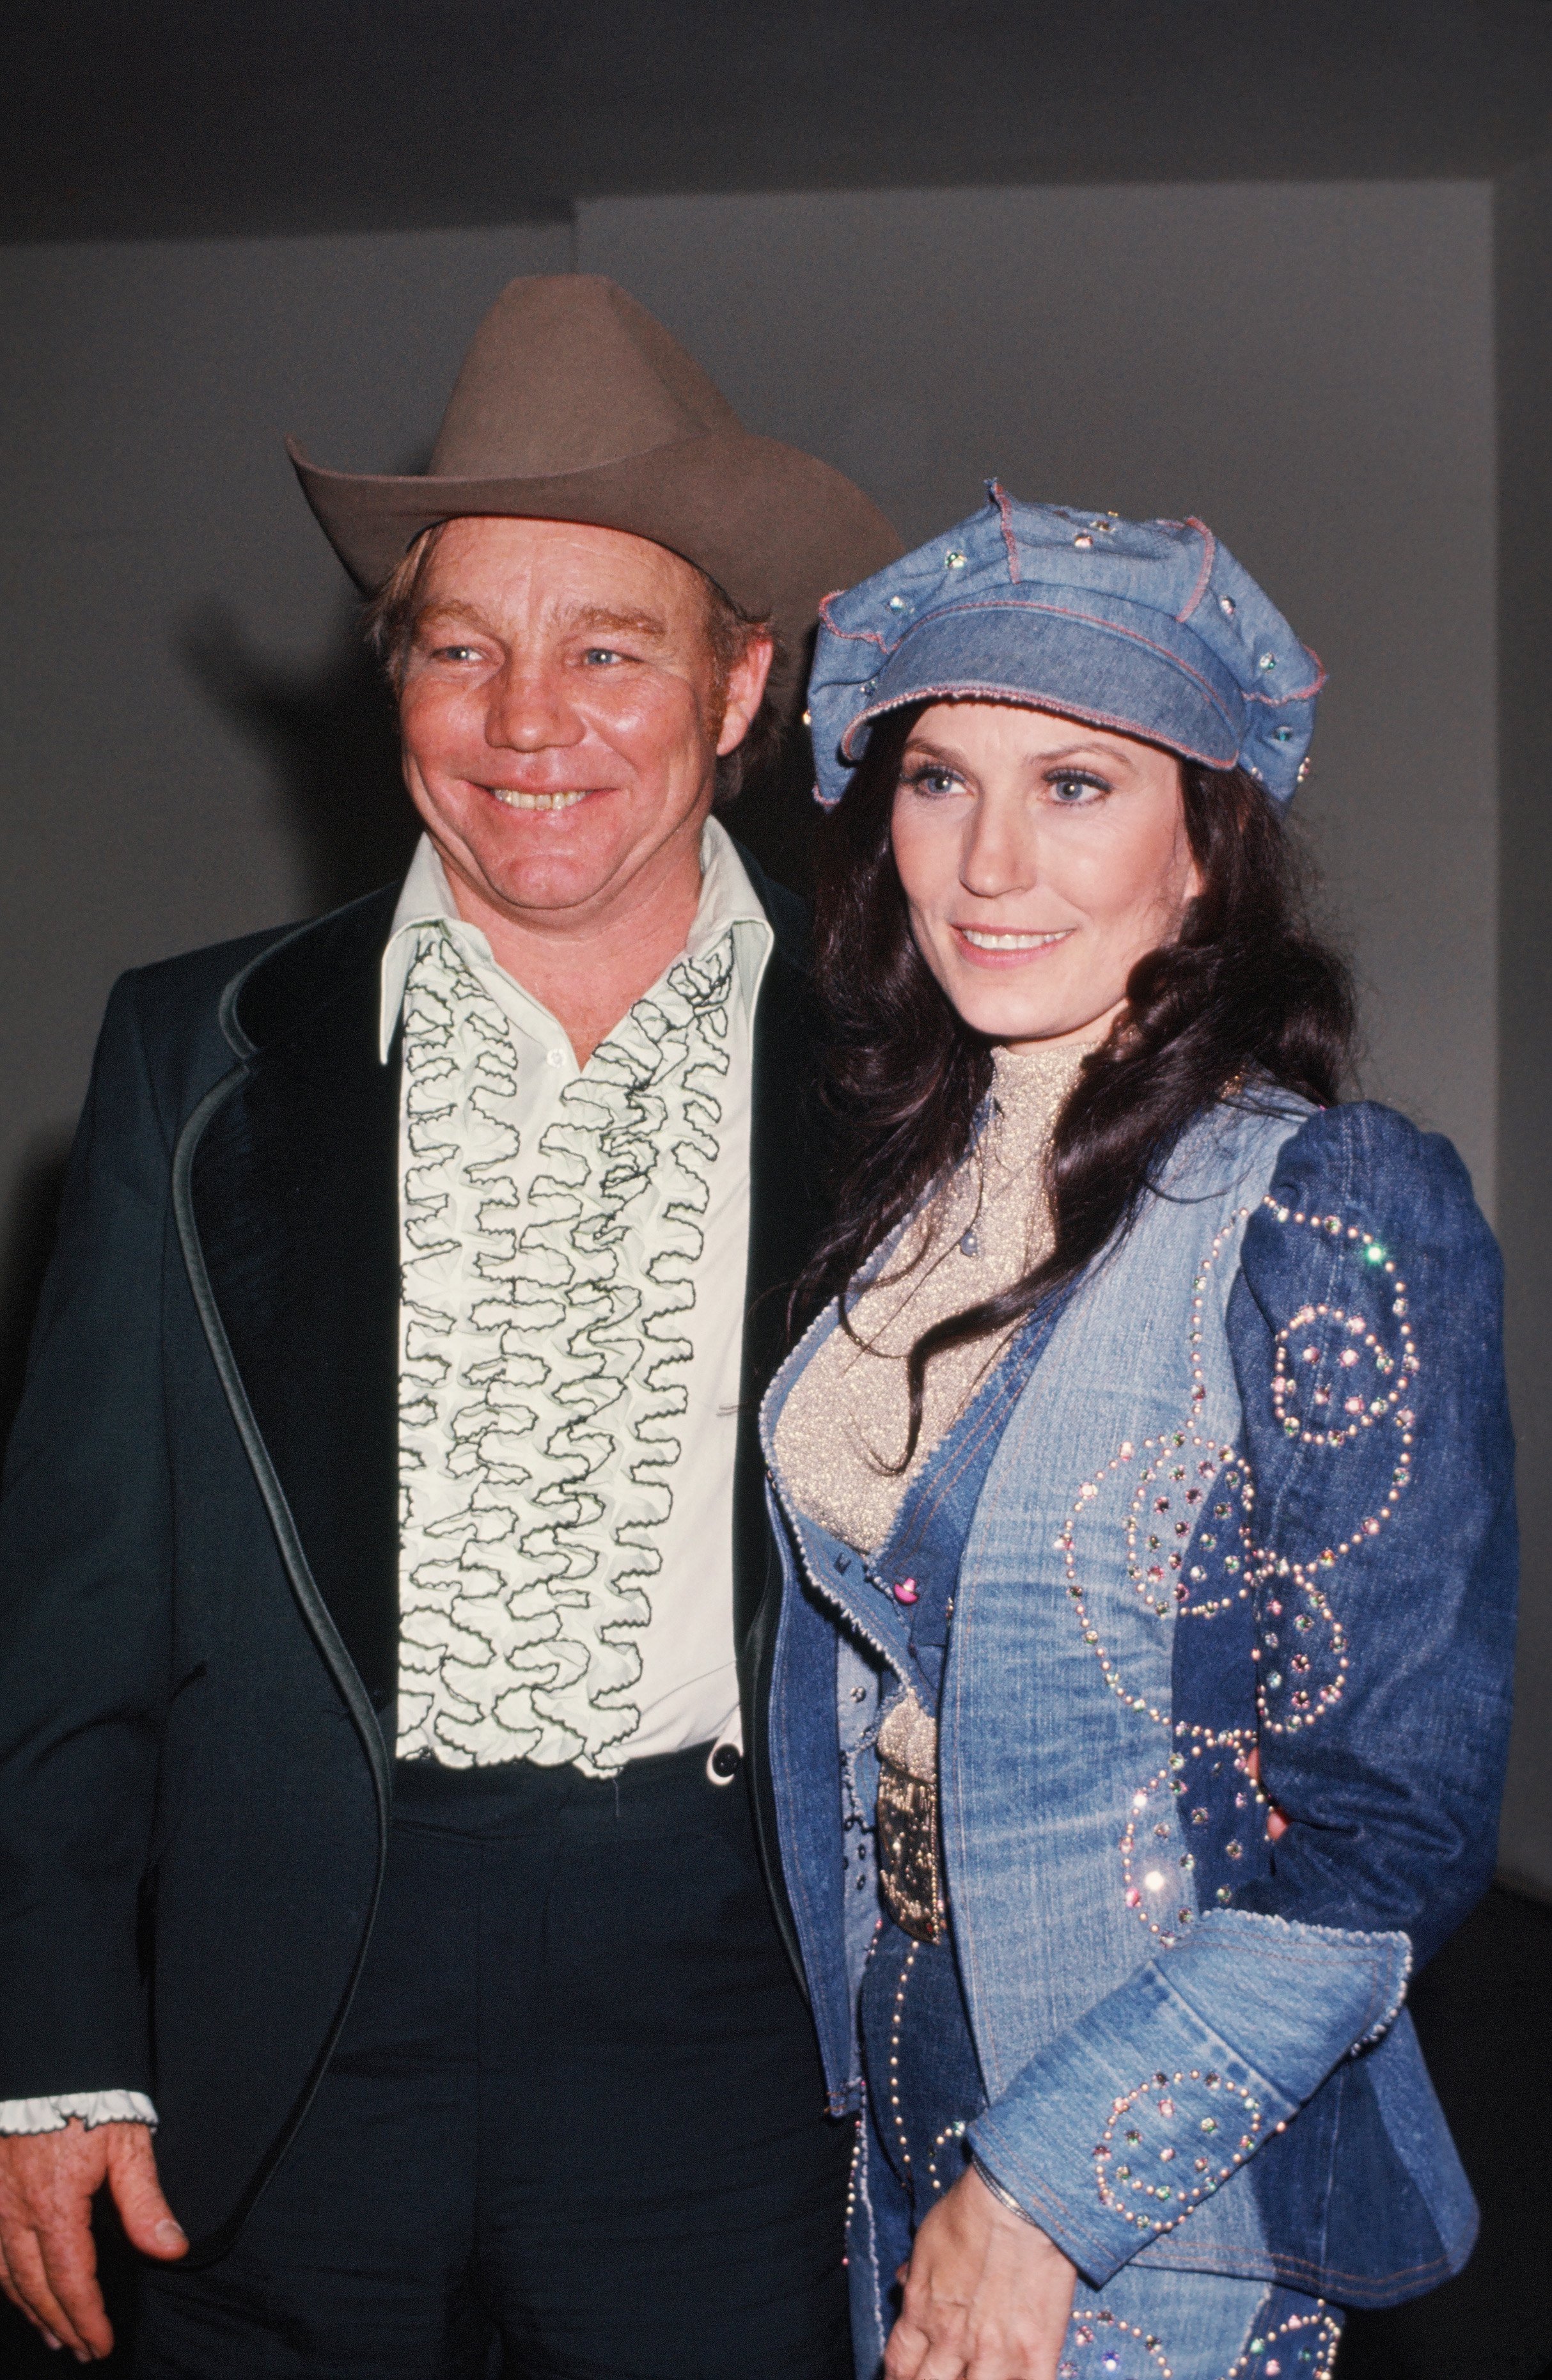 Loretta Lynn and her husband Oliver Vanetta "Doolittle" Lynn at a soiree in circa 1976 | Sources: Getty Images